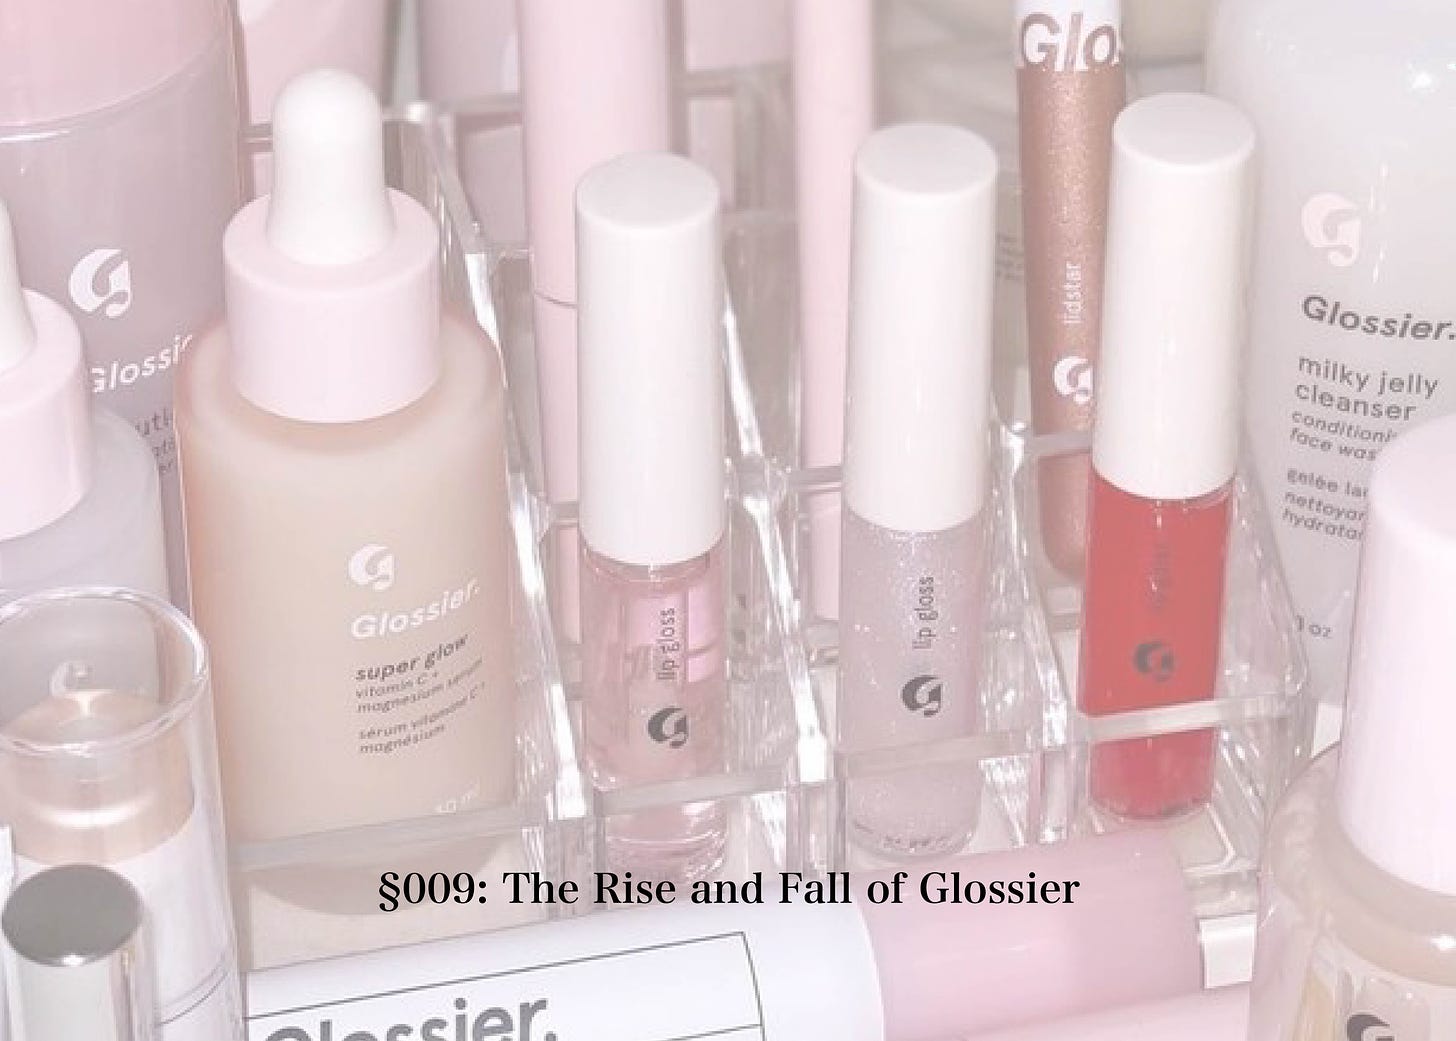 §009: The Rise and Fall of Glossier